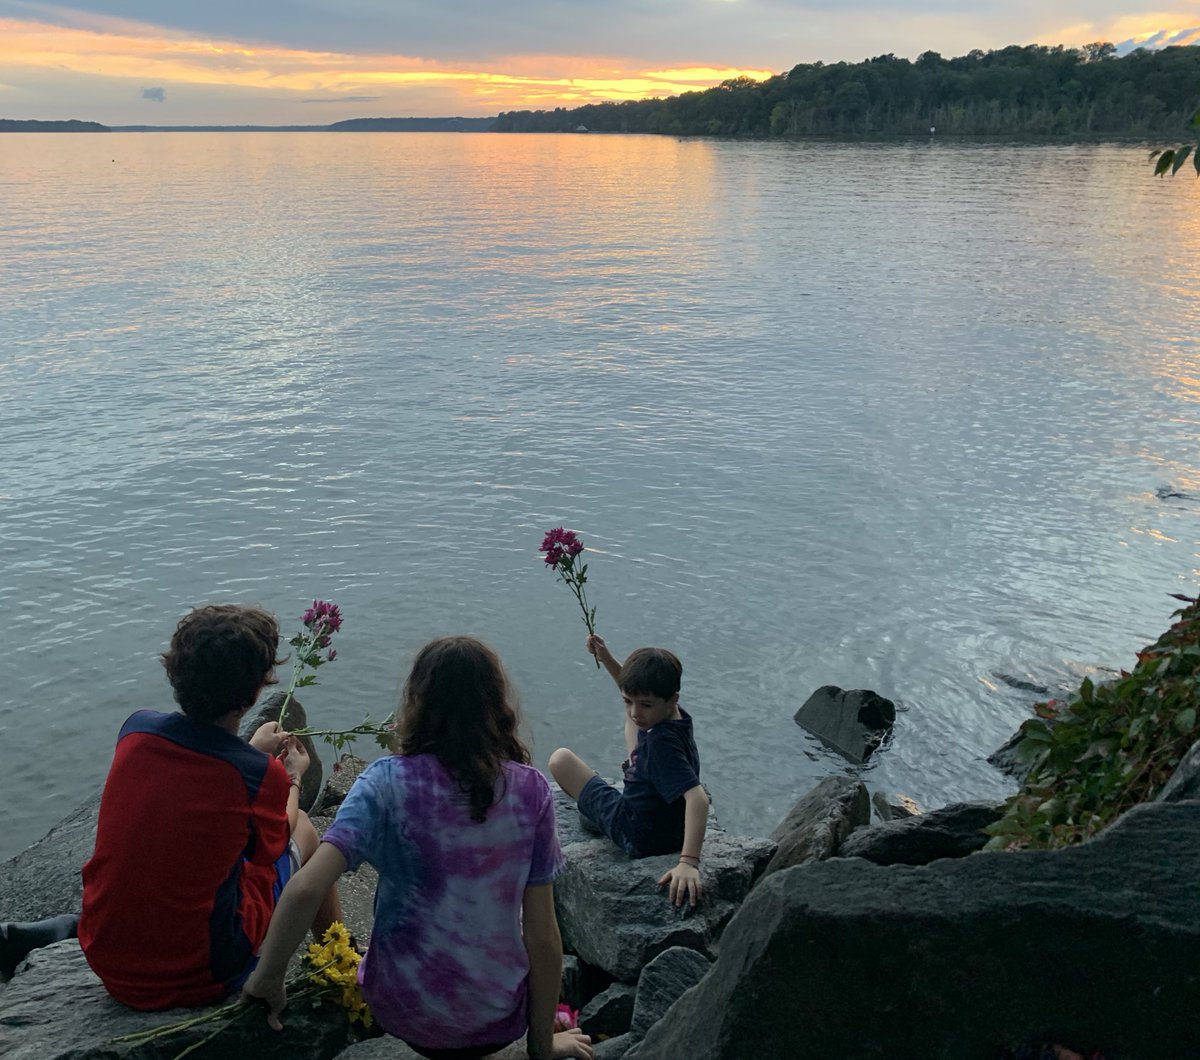 With us losing light fast, we placed the flowers in the Potomac in two groups. This was the first, with the children doing the honors. Everytime they threw a flower in the water, they said something about RBG. Like how she was kind or fought to make people’s lives better.